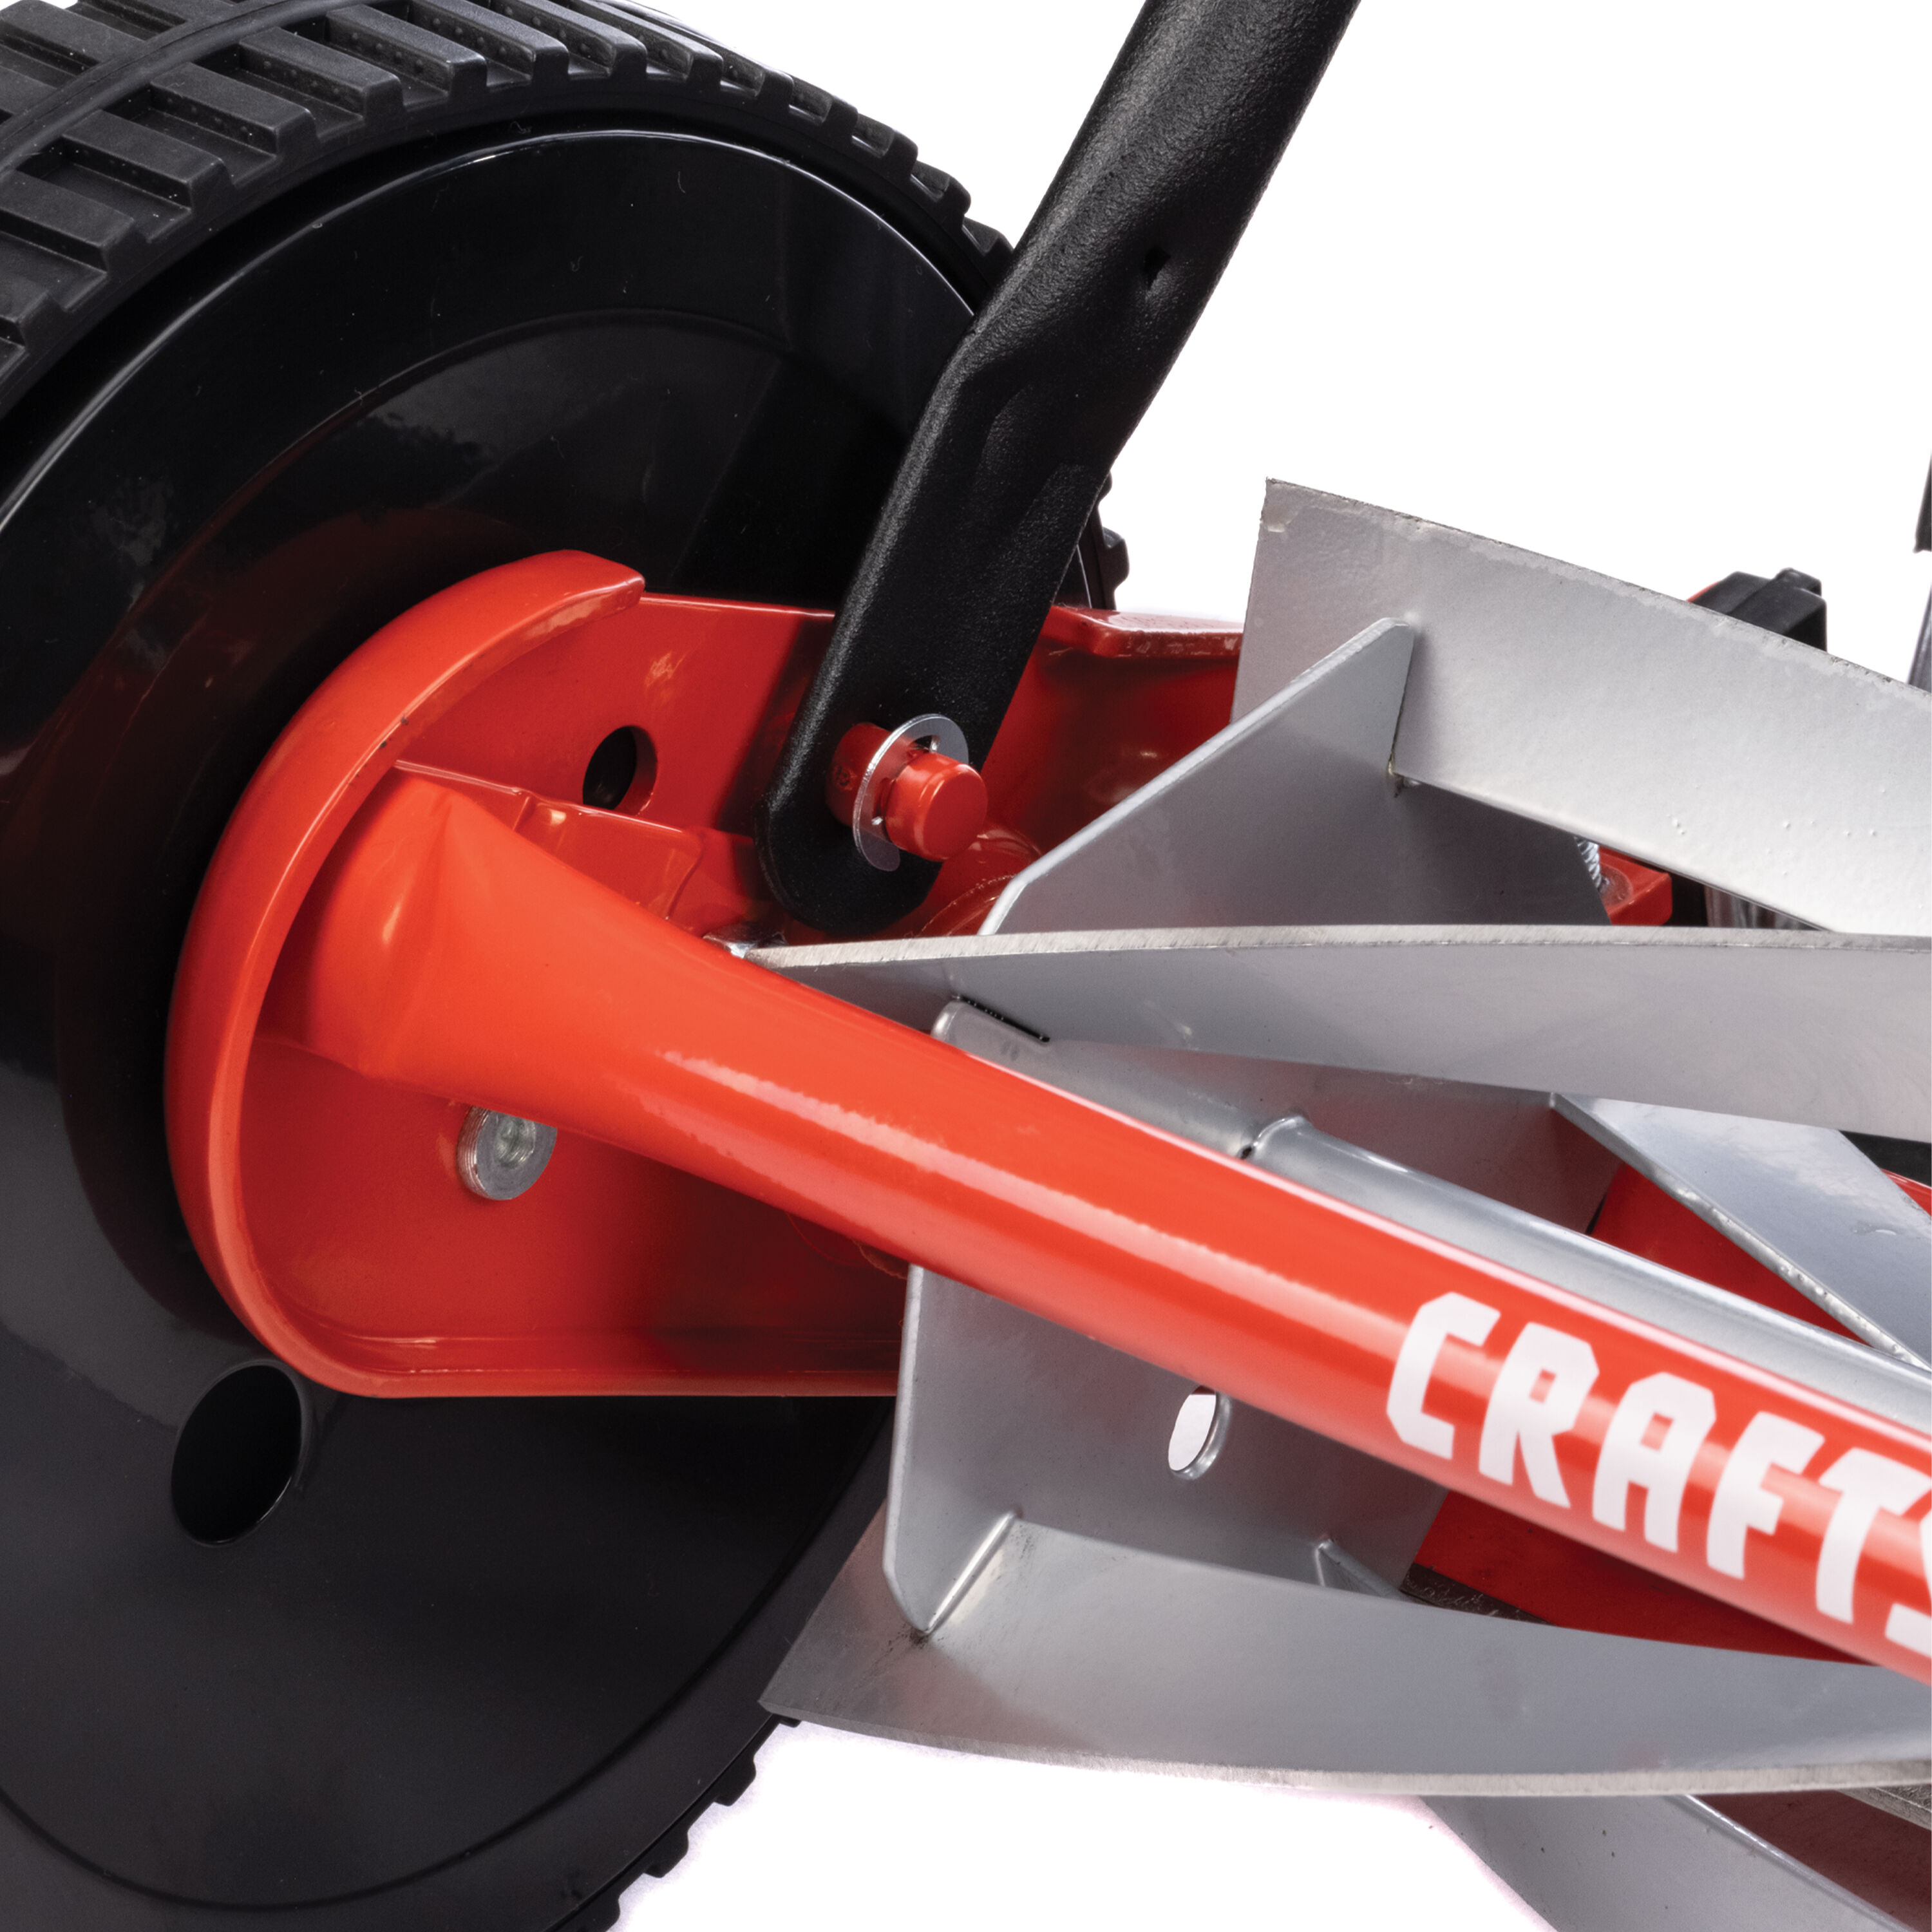 Craftsman 1816-16CR 16-inch 5-Blade Push Reel Lawn Mower with Grass Catcher, Red